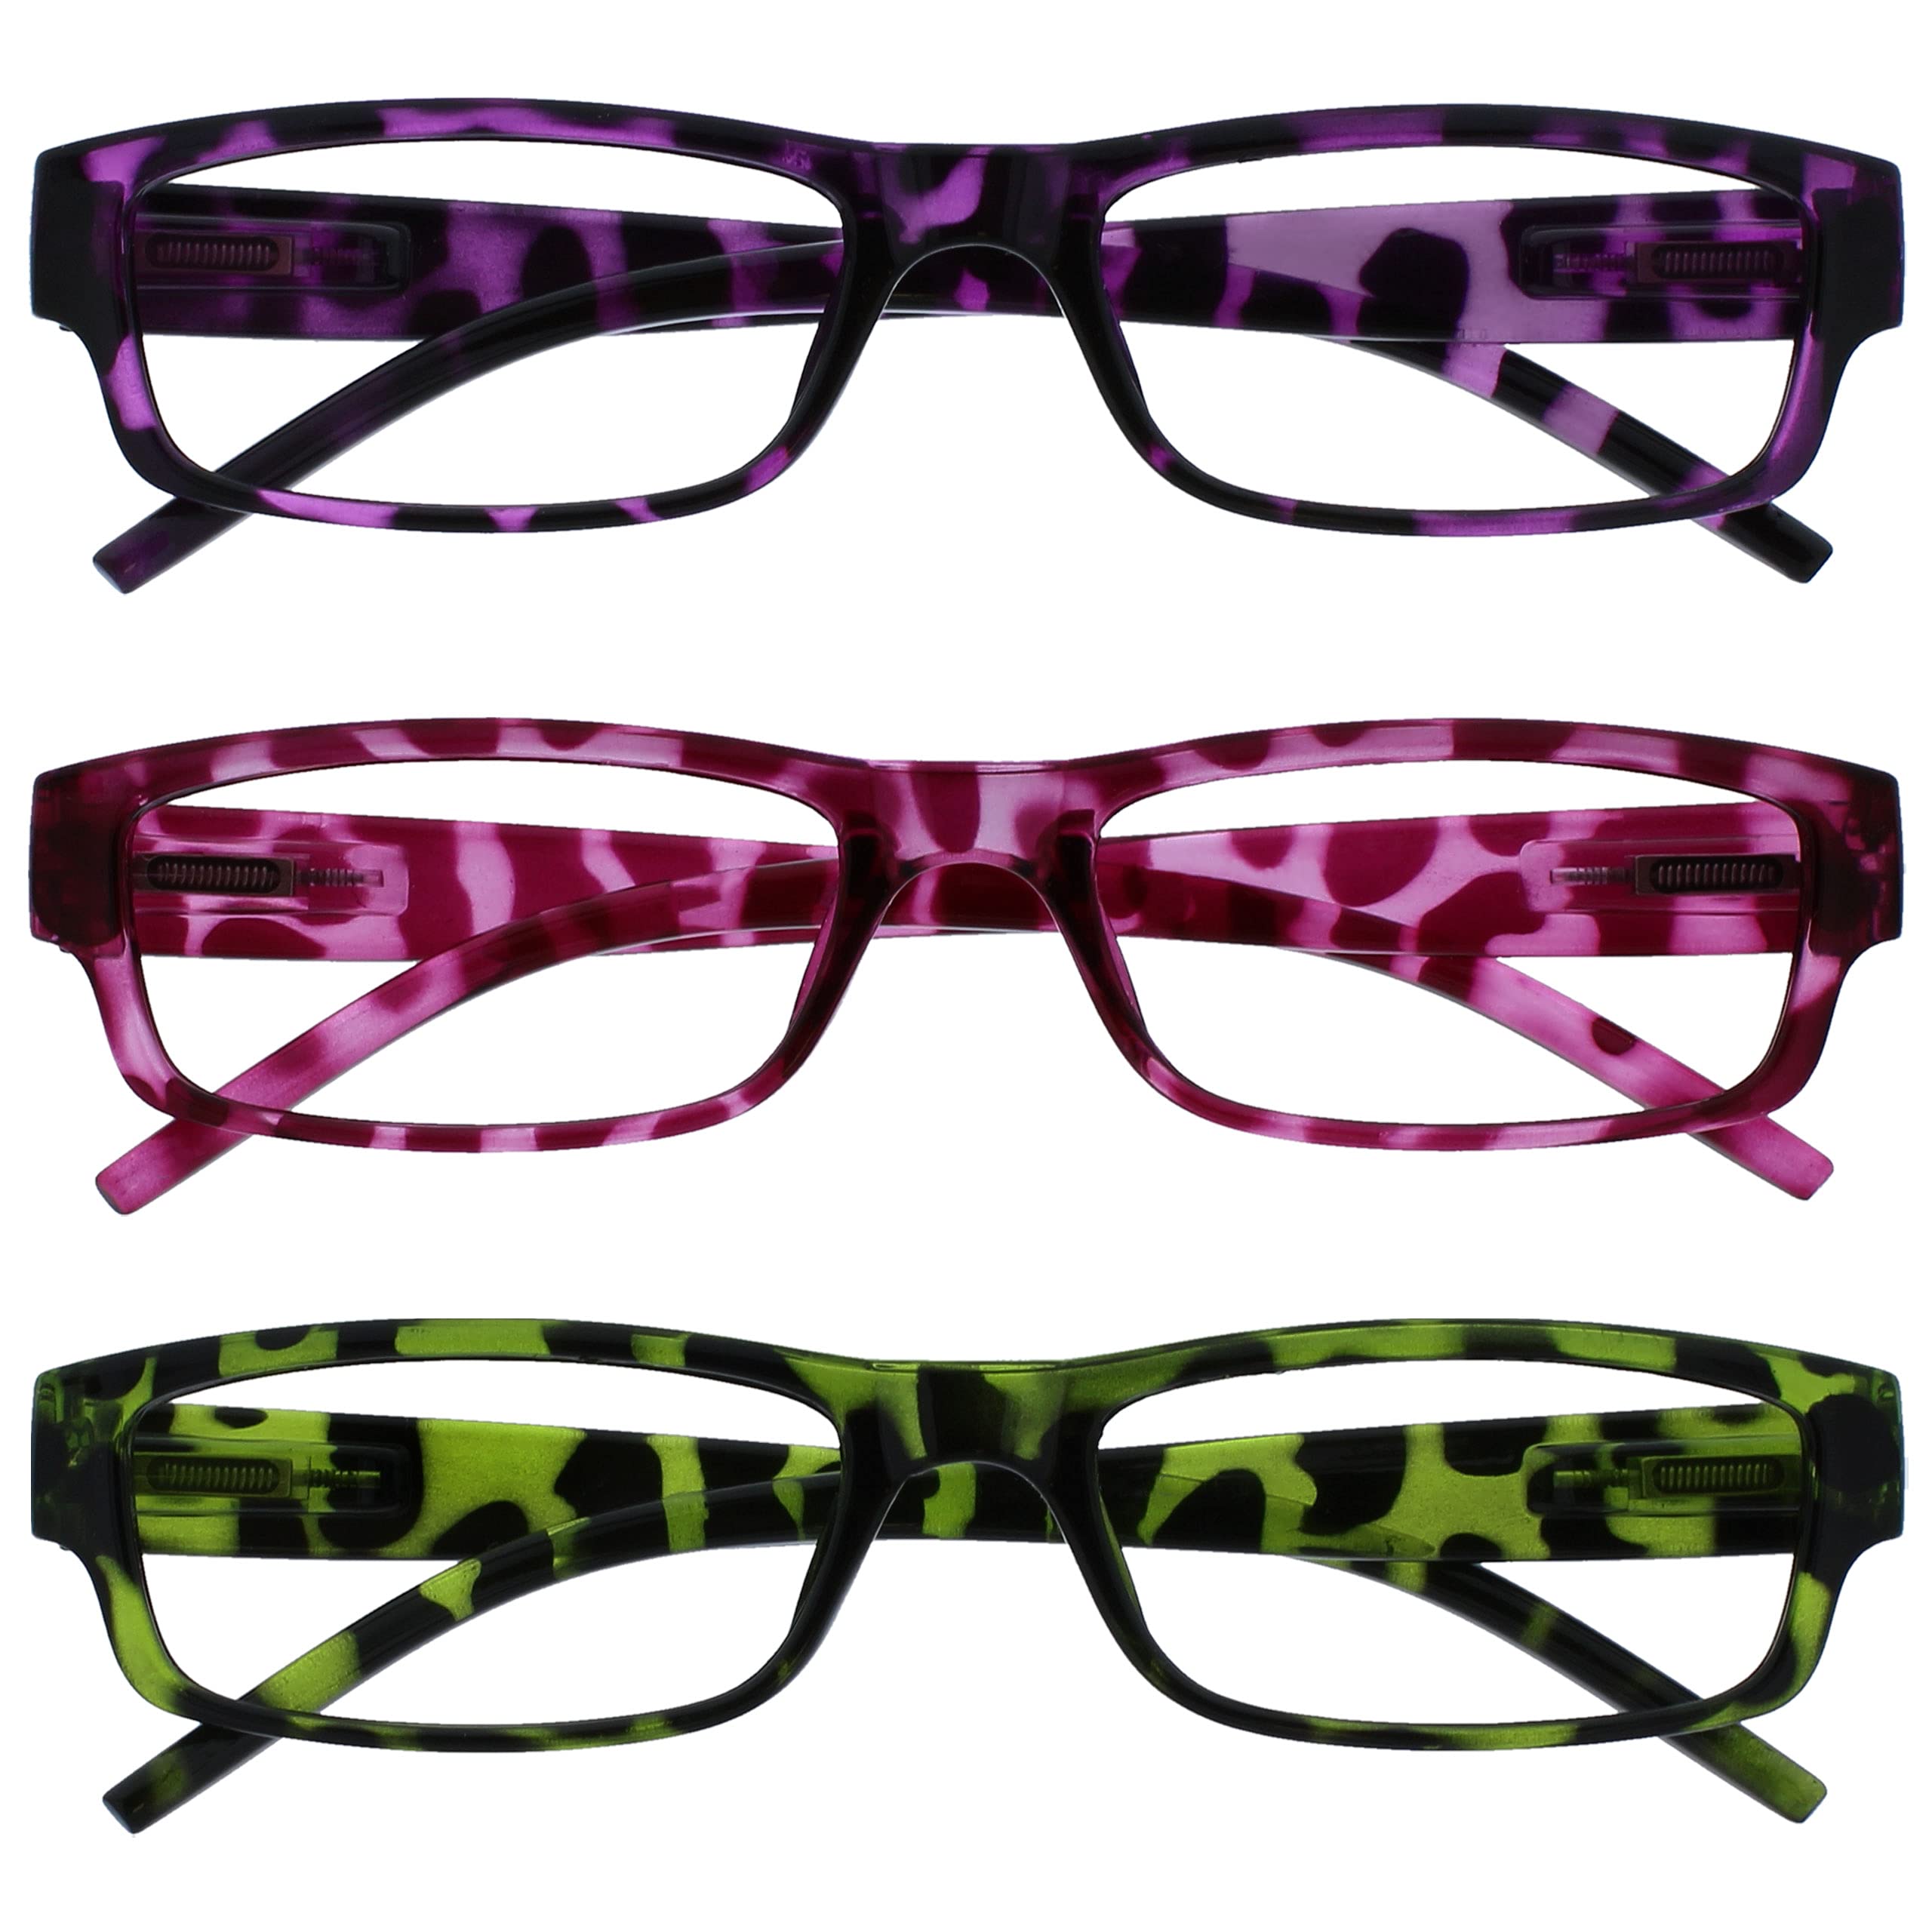 The Reading Glasses Company Unisex The Reading Glasses Company Purple Pink Green Lightweight Comfortable Readers Value 3 Pack Mens Reading Glasses Mixed 3 Pack (pack of 1)